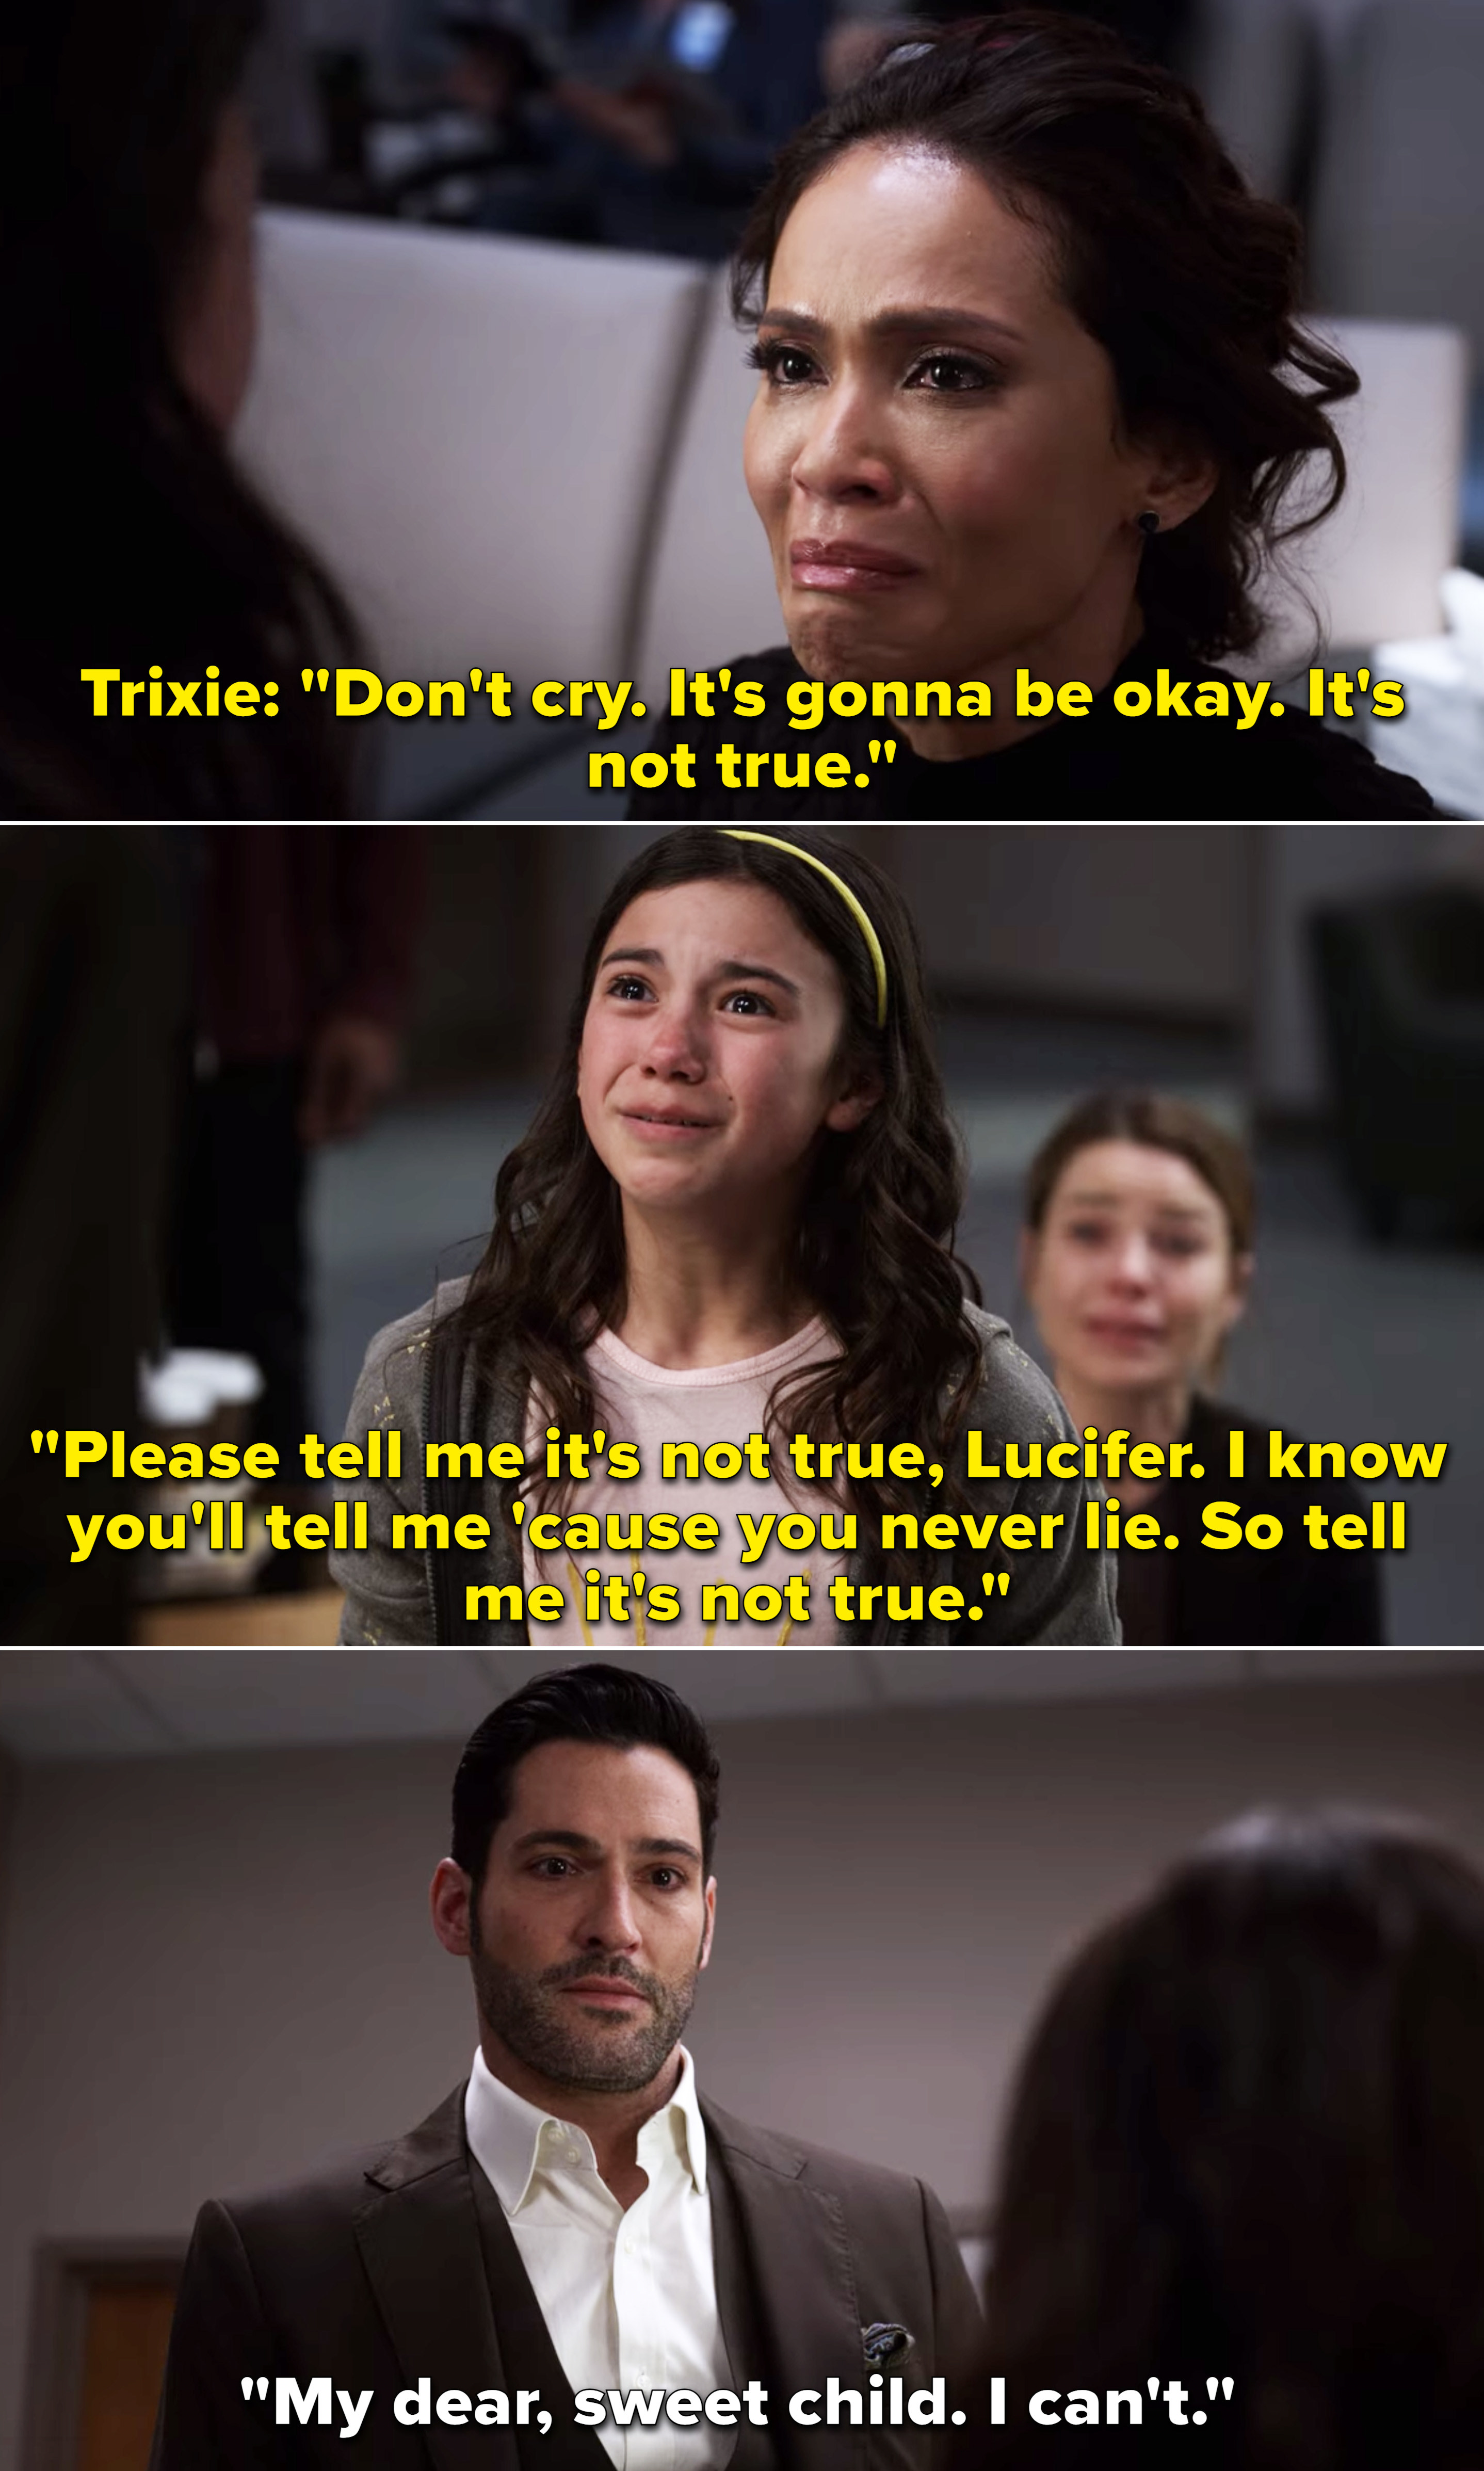 Trixie telling Lucifer, &quot;Please tell me it&#x27;s not true, Lucifer. I know you&#x27;ll tell me &#x27;cause you never lie&quot;